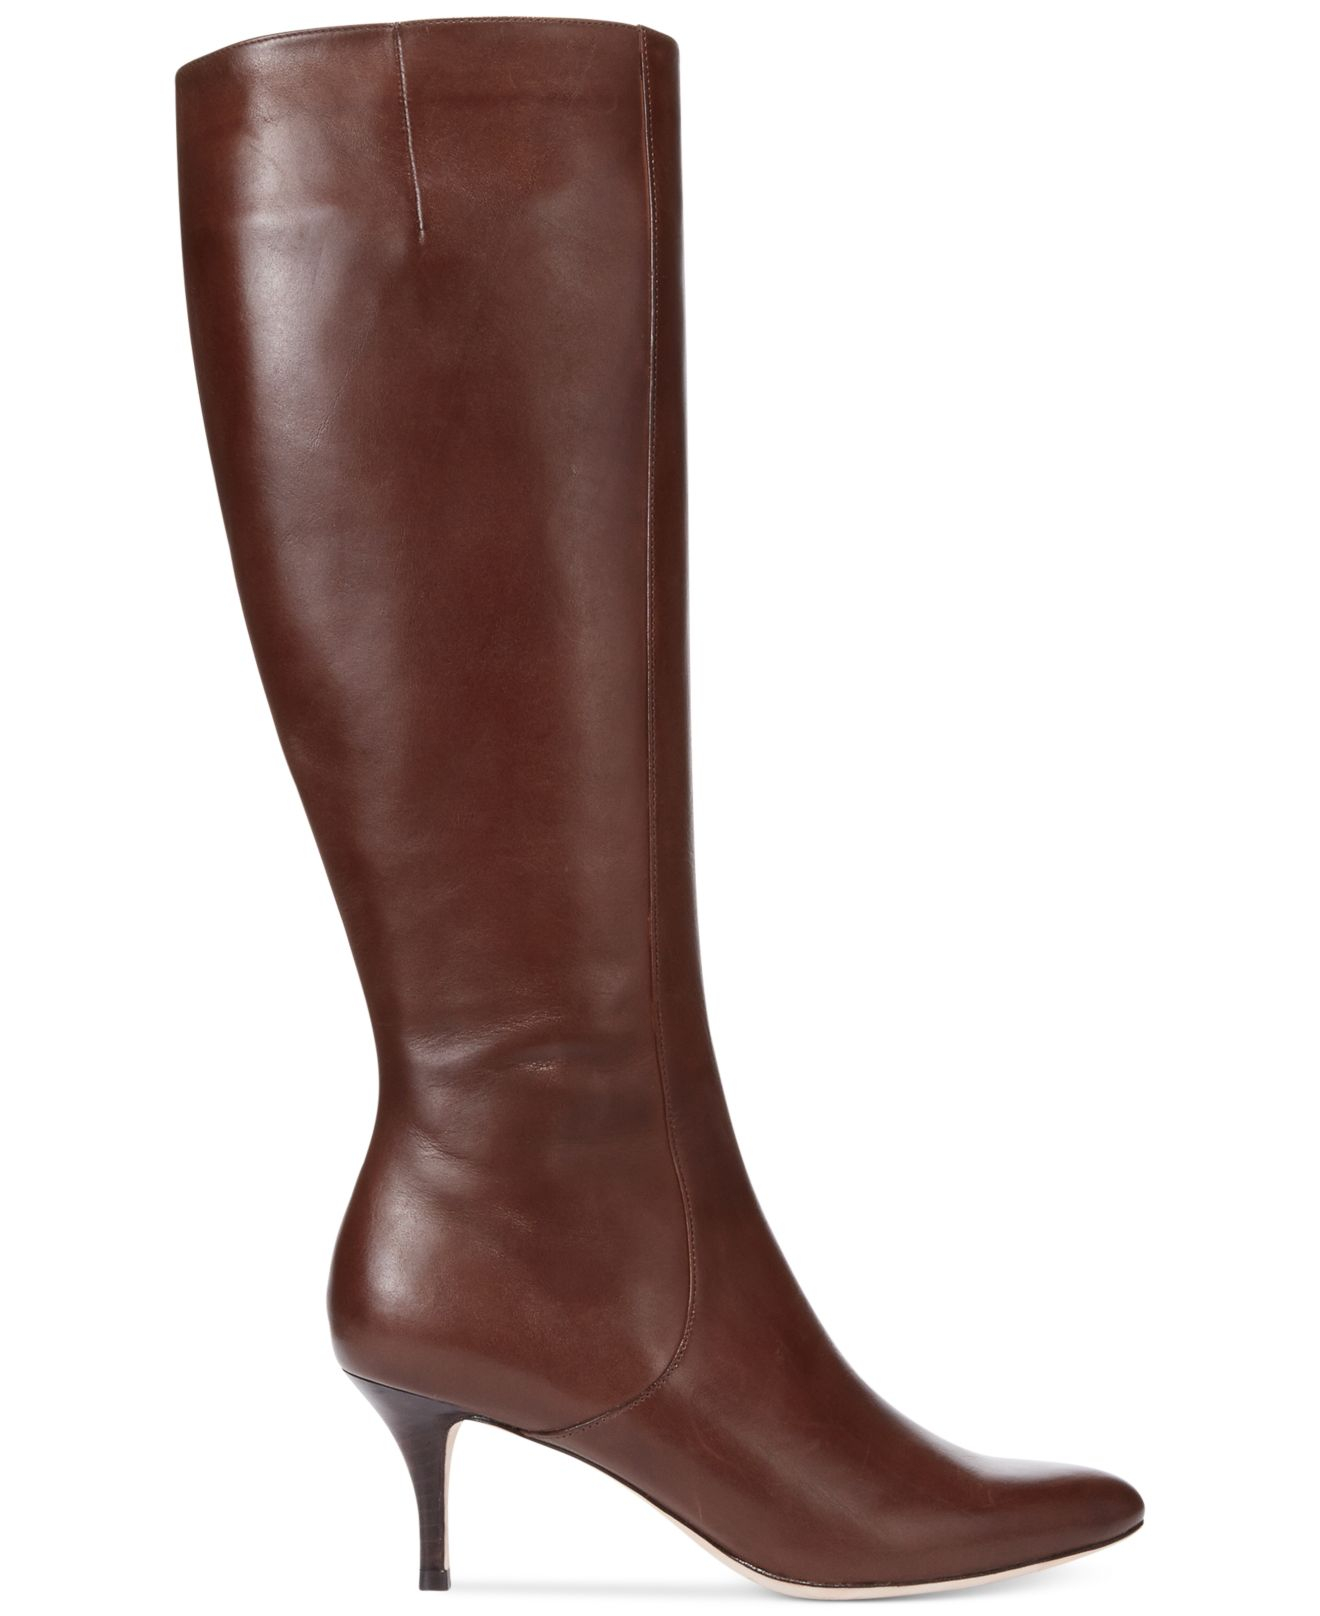 Lyst Cole haan Women S Carlyle Tall Dress Boots in Brown